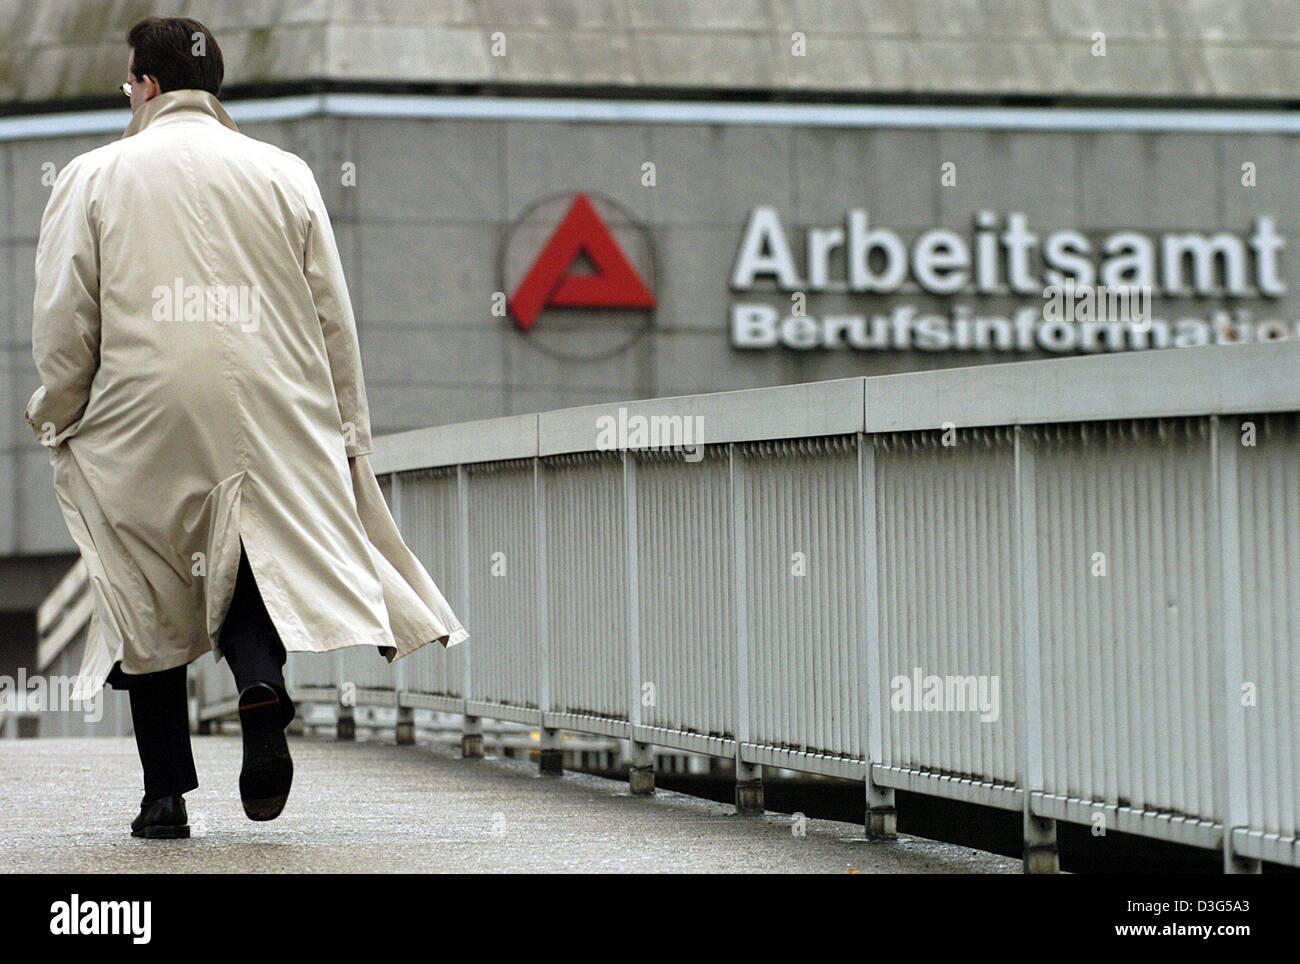 (dpa) - A man walks towards the job centre (Arbeitsamt) in Cologne, Germany, 17 November 2003. German unemployment in November rose by 32,700 on an unadjusted basis to 4,184,500, but in a sign of improvement in the hard-hit job sector, unadjusted joblessness fell for the third straight month, officials reported 4 December 2003. Analysts said the data pointed to the stepped-up effor Stock Photo